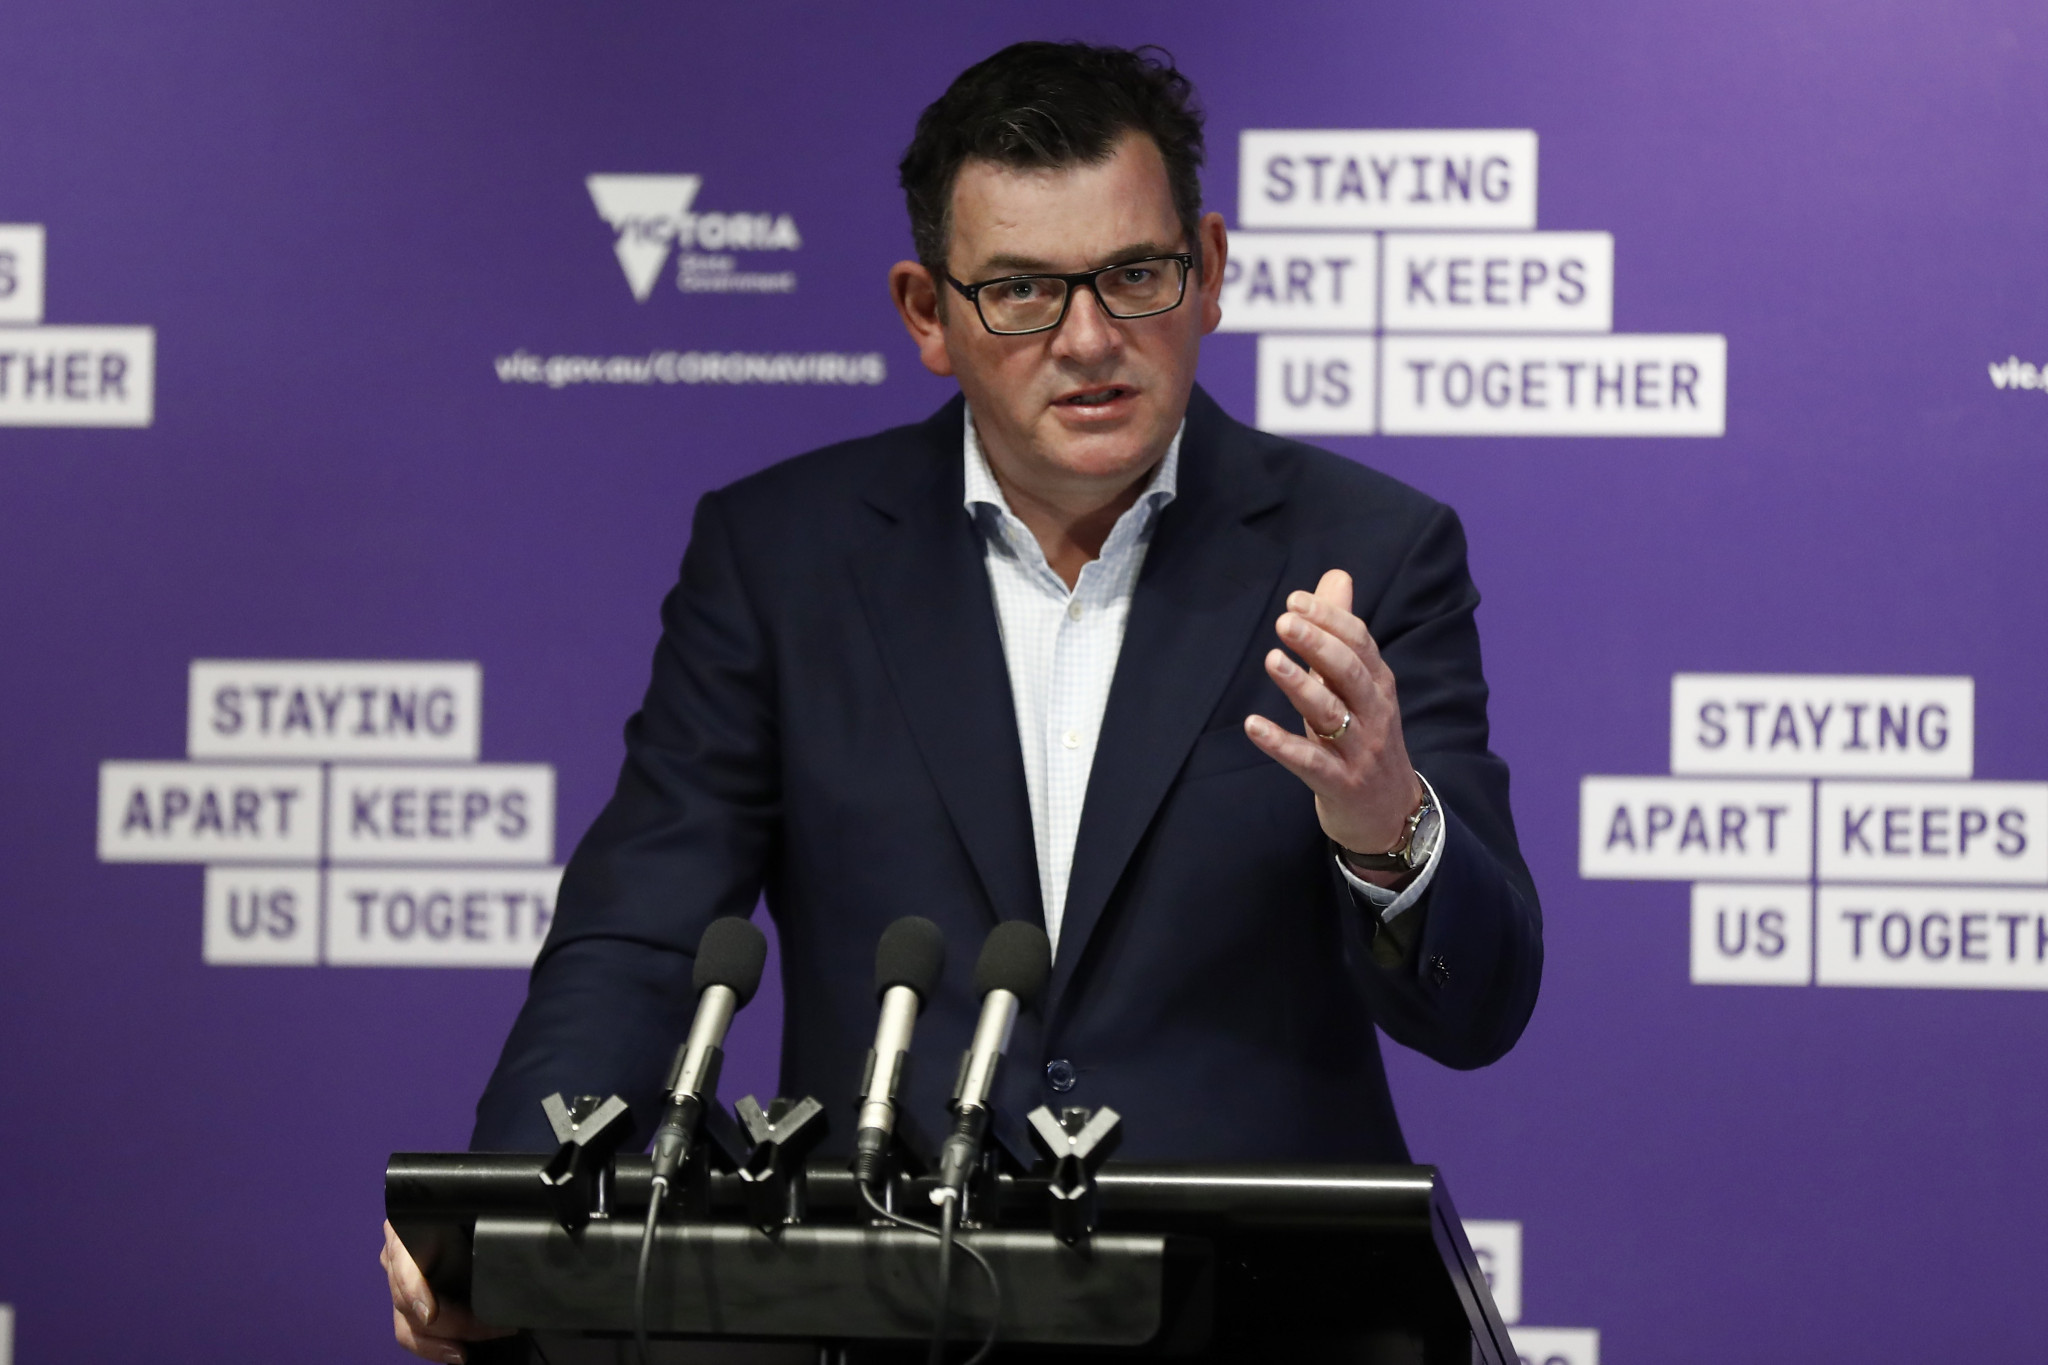 Victoria Premier Daniel Andrews said unvaccinated players could be denied entry into Australia ©Getty Images